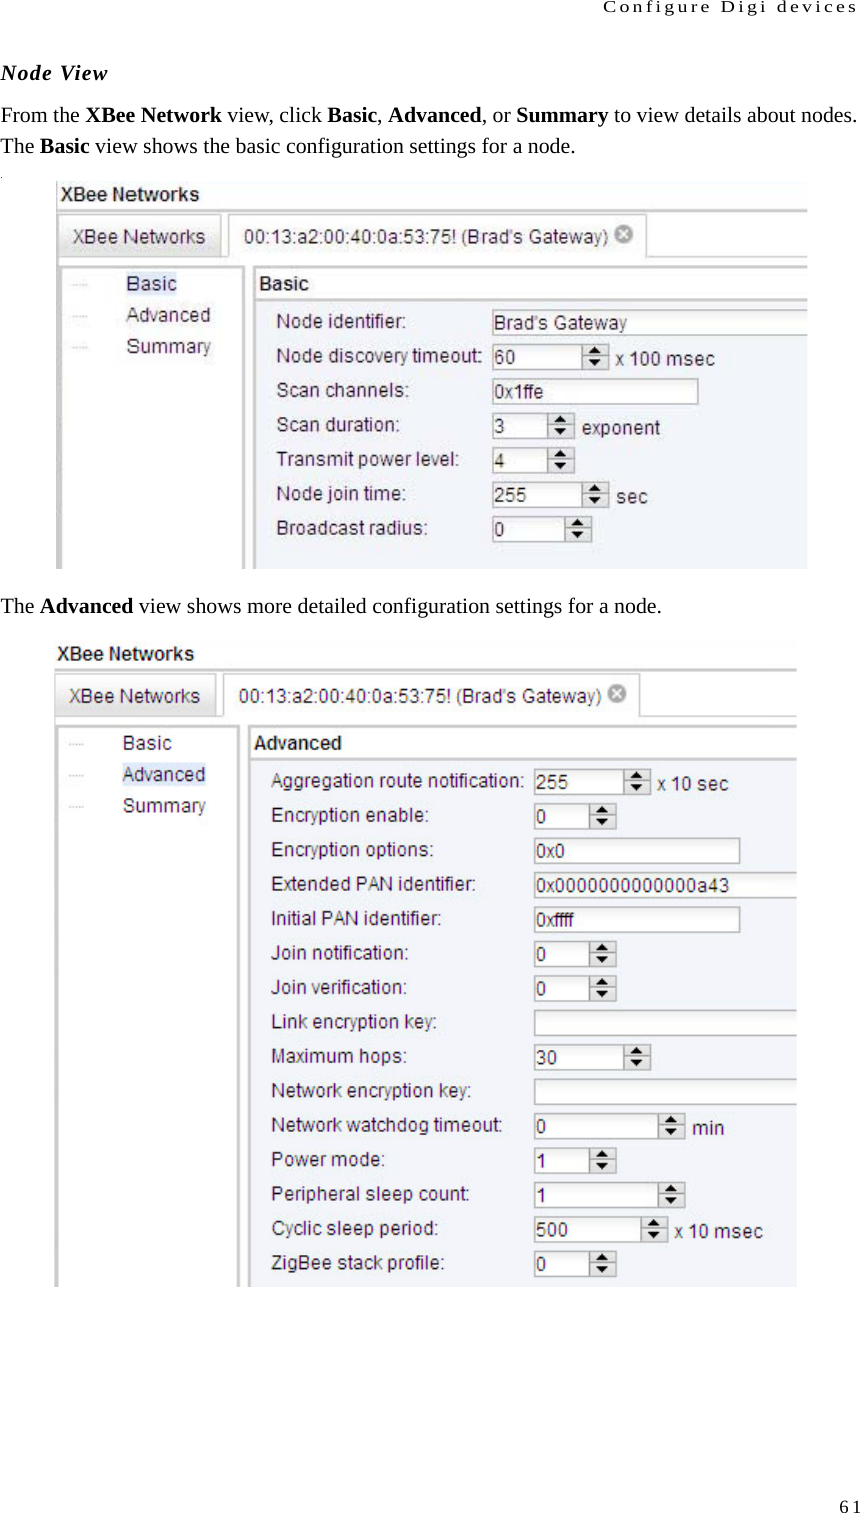 Configure Digi devices61Node ViewFrom the XBee Network view, click Basic, Advanced, or Summary to view details about nodes. The Basic view shows the basic configuration settings for a node..The Advanced view shows more detailed configuration settings for a node.